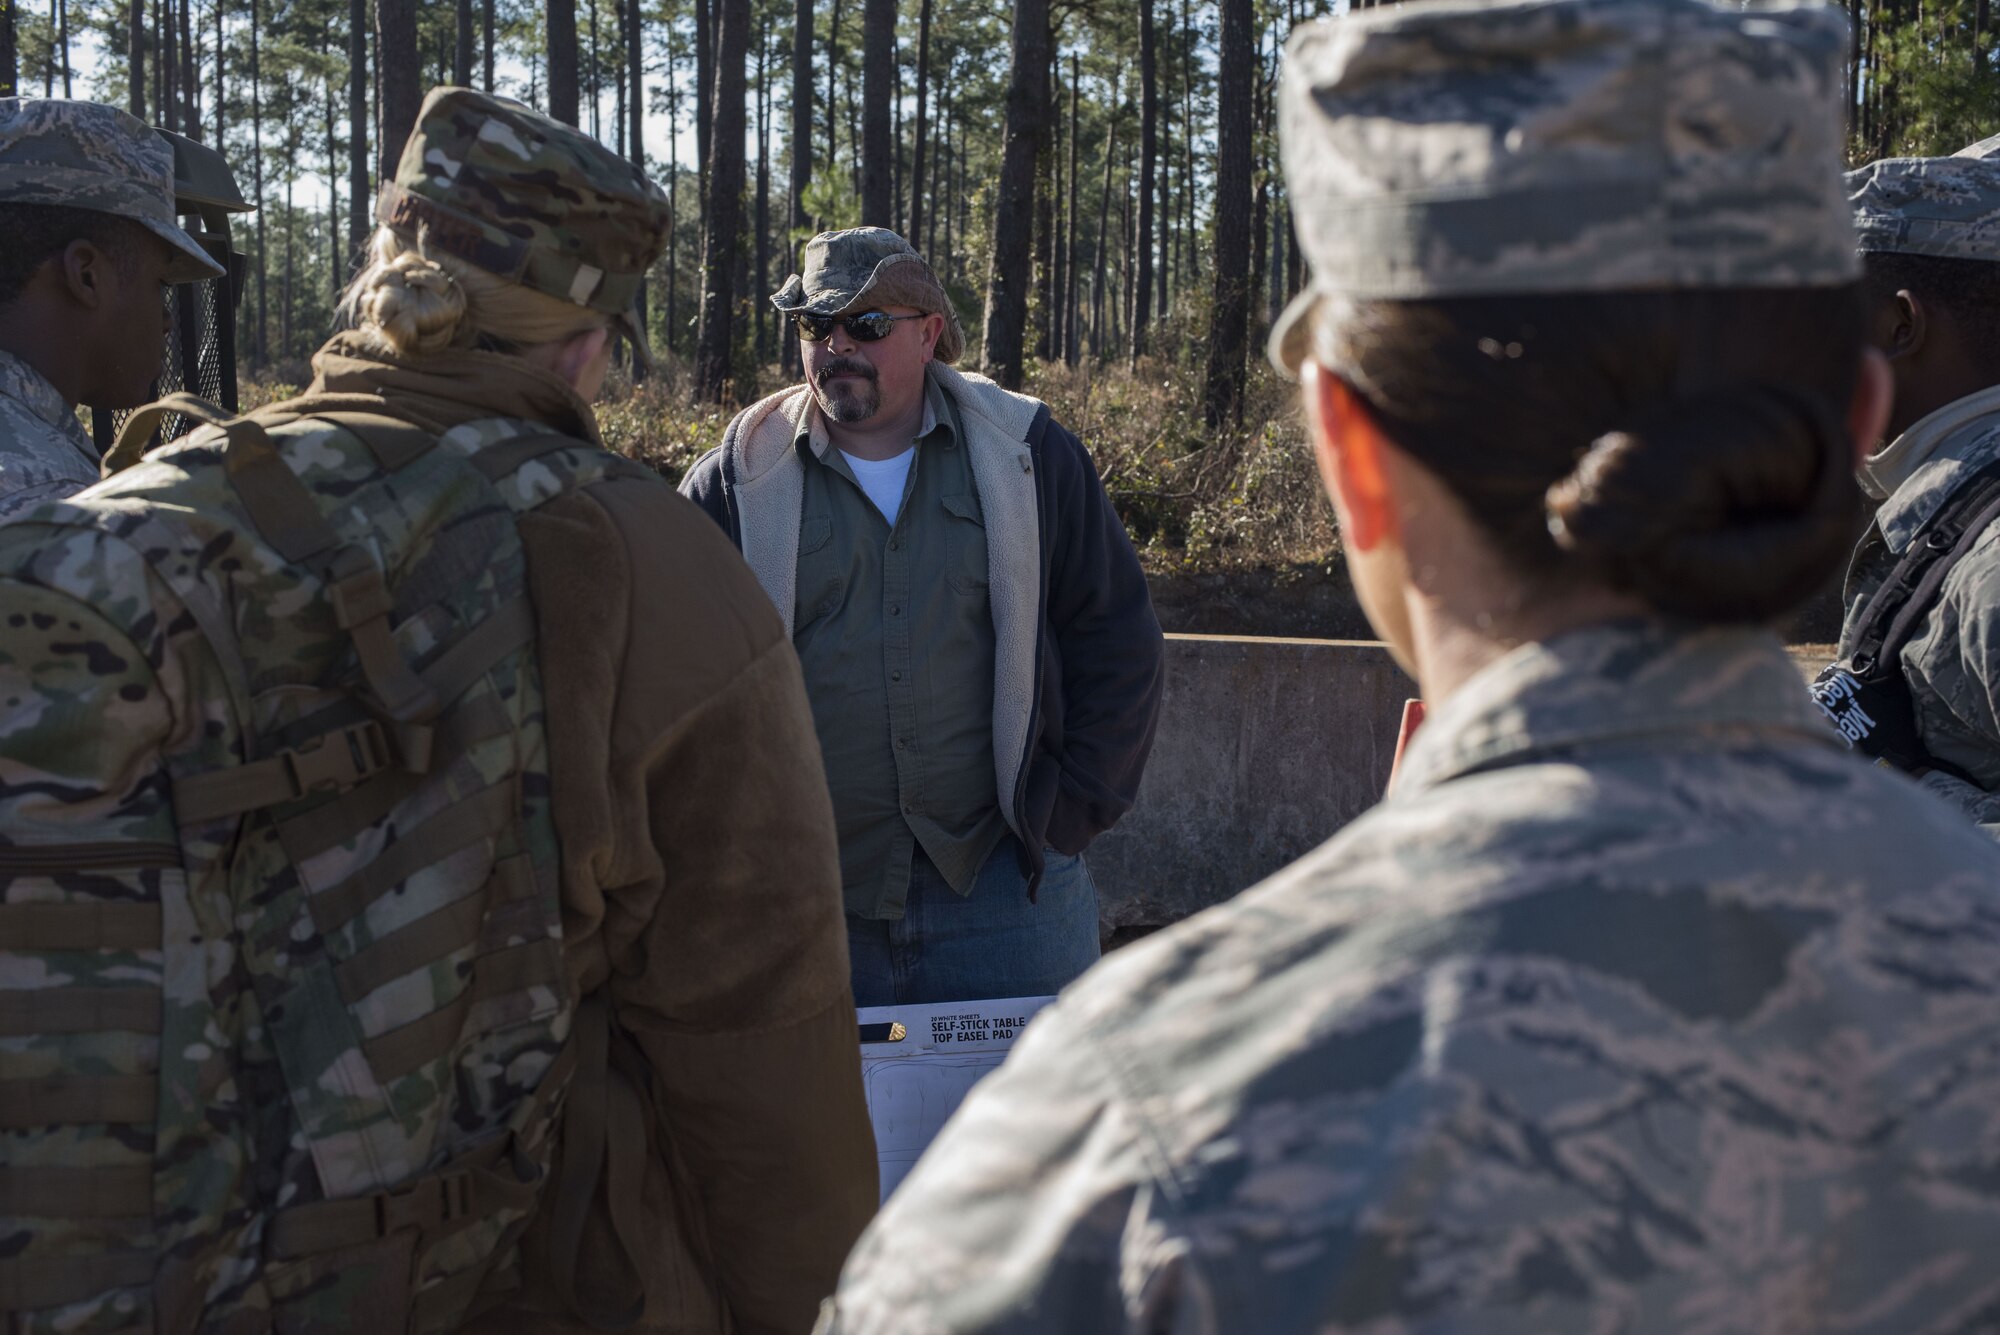 Matthew Brogan, 820th Combat Operations Squadron junior counter-improvised explosive device (IED) integrator, briefs 820th Base Defense Group members before training, Jan. 24, 2018, at Moody Air Force Base, Ga. The 820th BDG defenders trained on how to detect IEDs and counter measures to take when one is found. IEDs have become one of the most common forms of attack in the Middle East since 2003. (U.S. Air Force photos by Staff Sgt. Eric Summers Jr.)